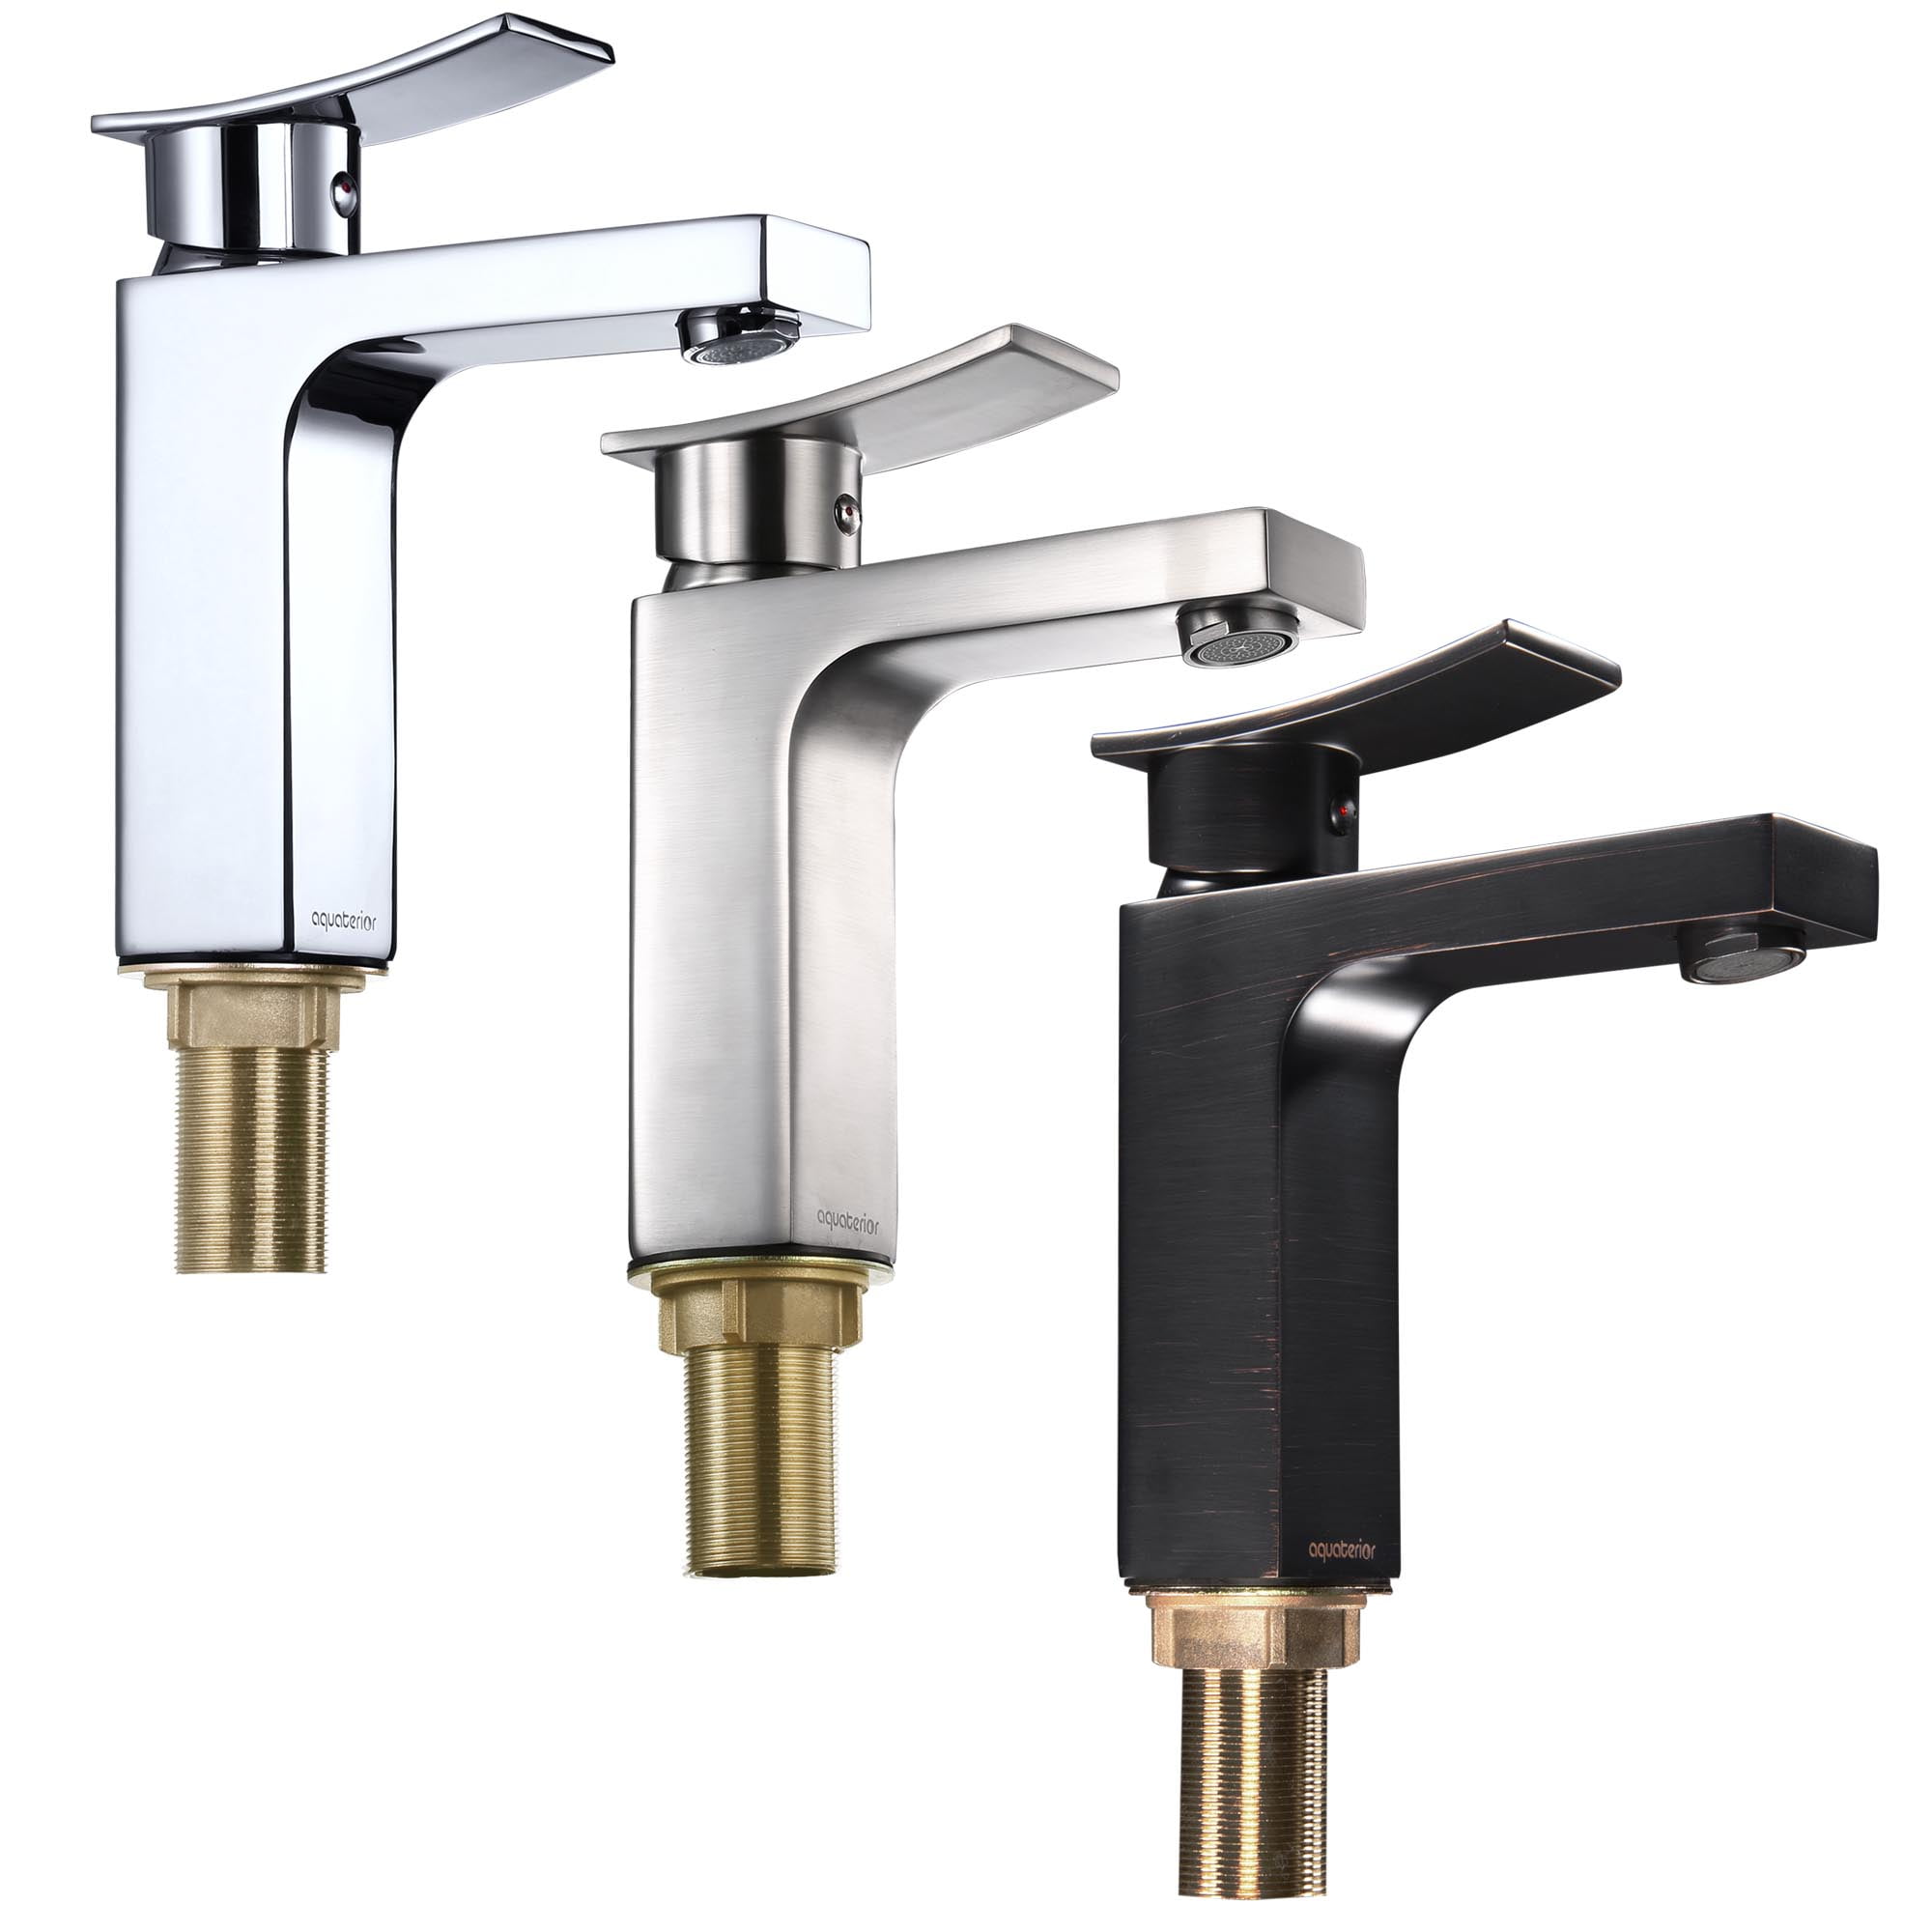 1XStainless Steel Bathroom Kitchen Washbasin Faucet Square Sink Basin Mixer Tap 